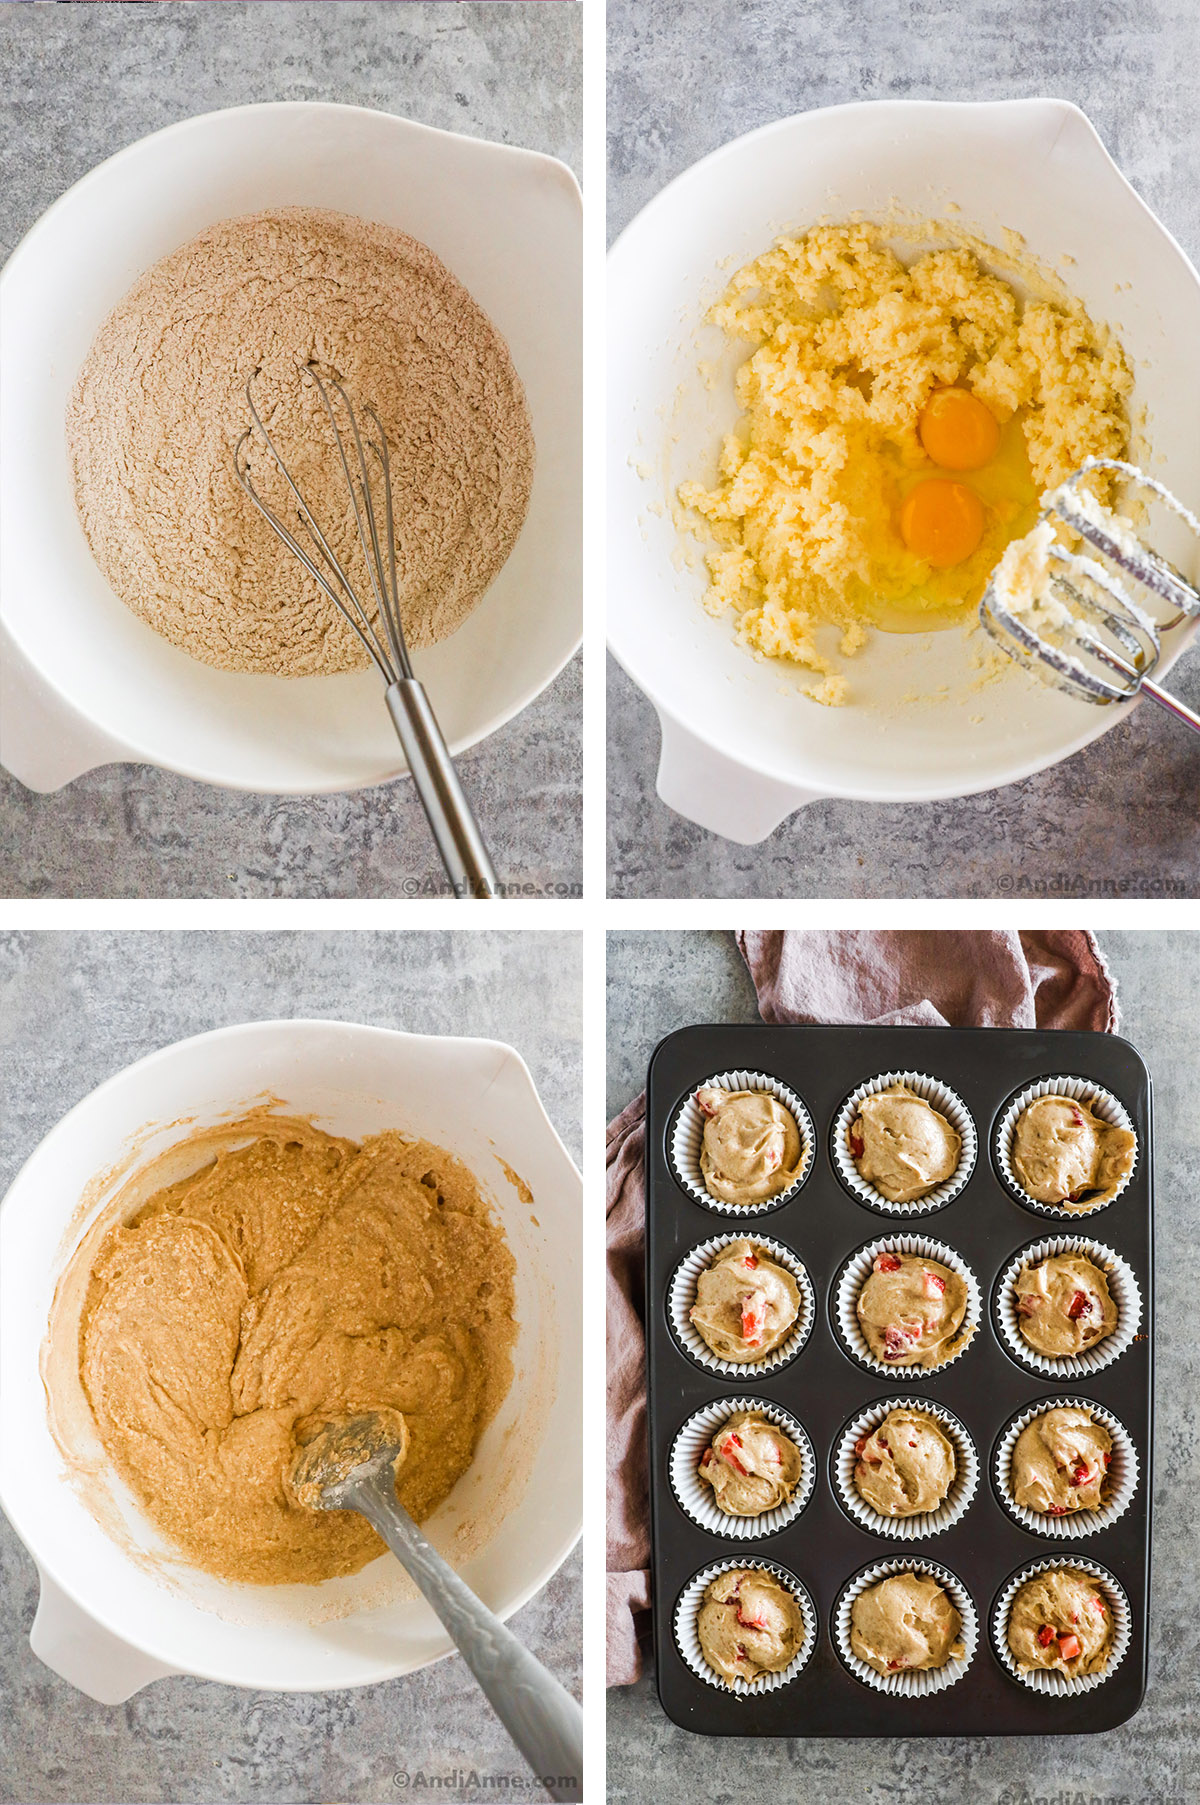 Four images showing steps to make recipe. First is dry ingredients with a whisk in a bowl. Second is beaten butter with two eggs on top and a hand mixer, third is muffin batter in a bowl. Fourth is muffin batter divided in a muffin pan.